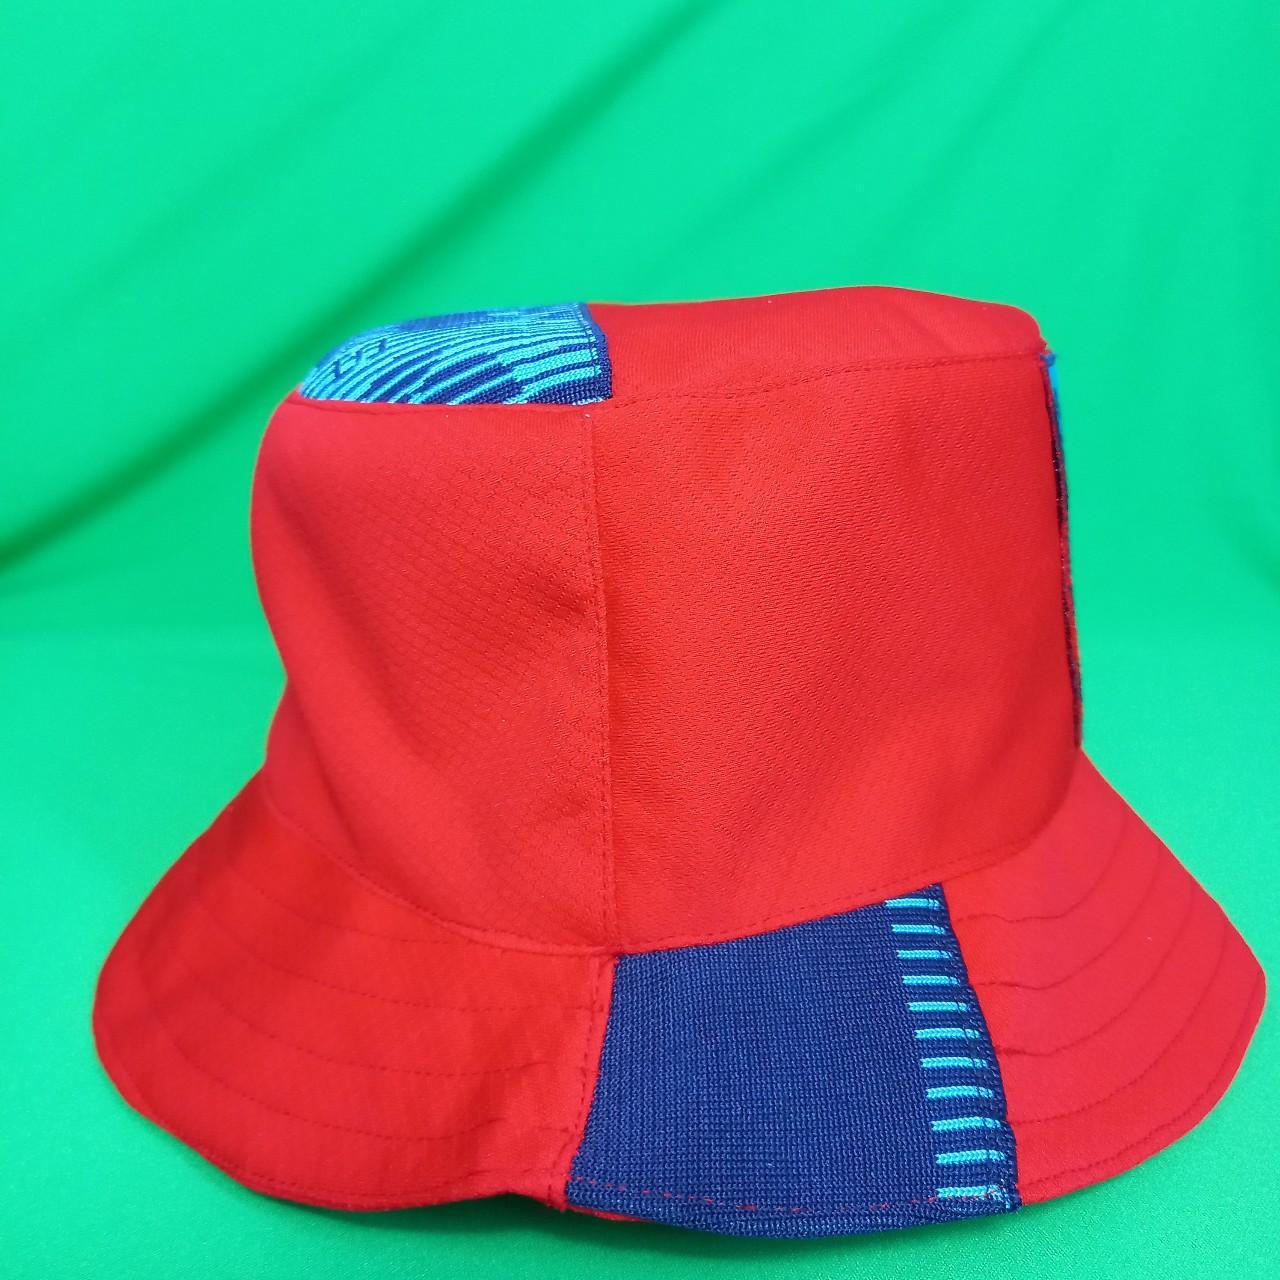 Upcycled Louis Vuitton bucket hat. The authentic - Depop